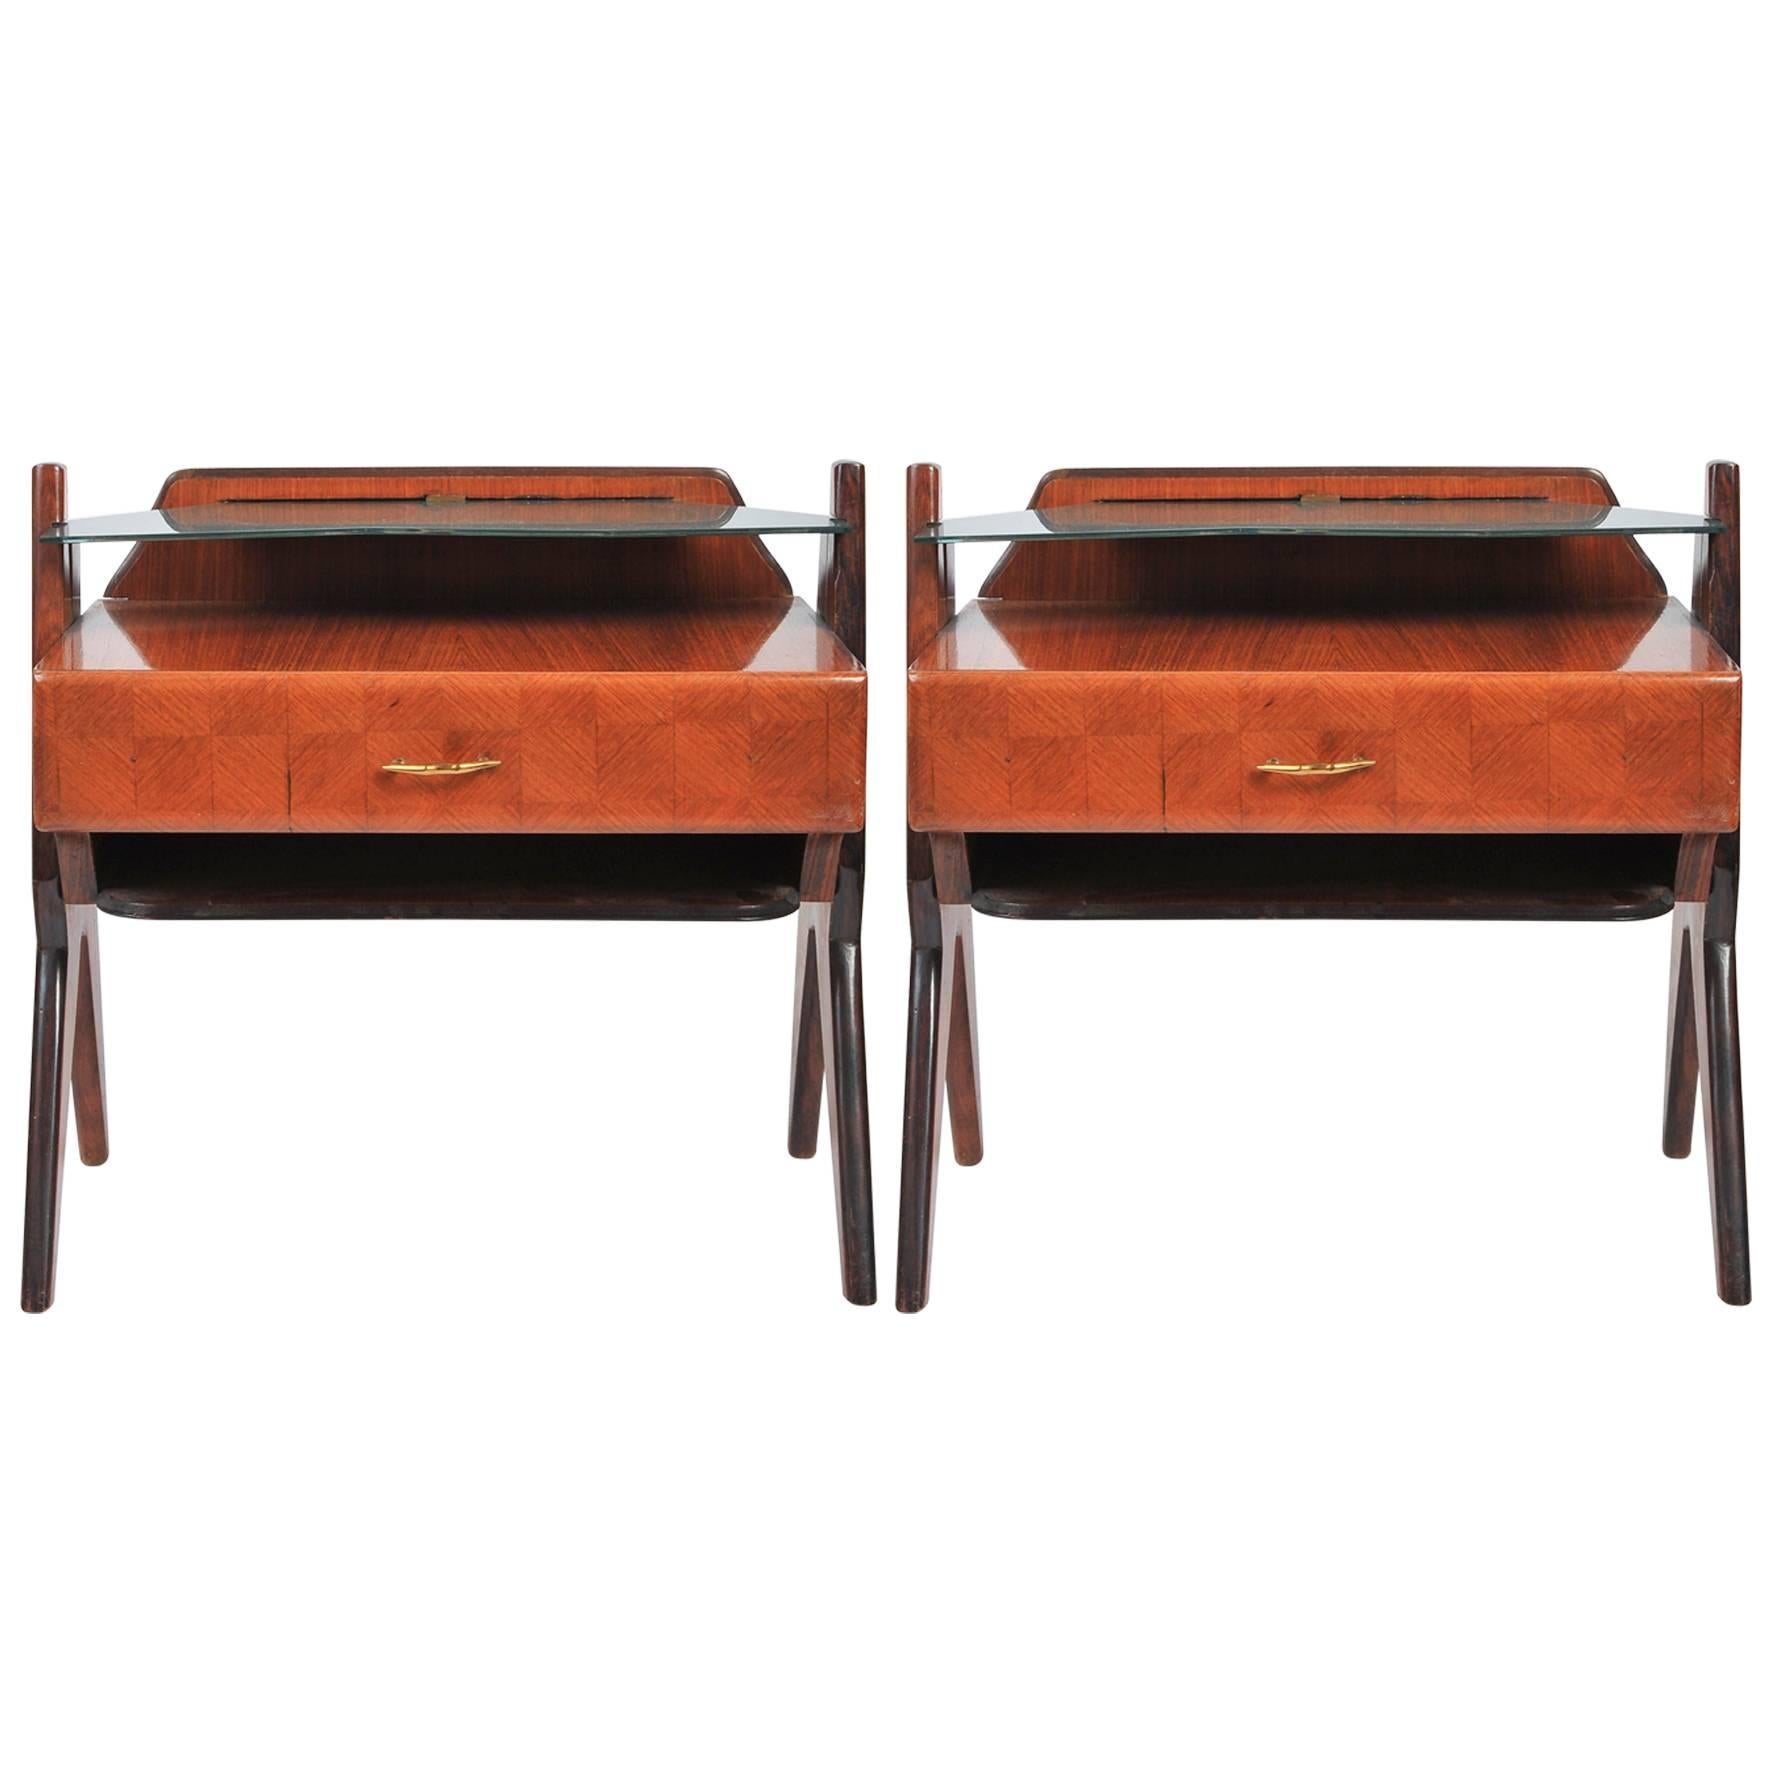 1945-1950 Pair of Side Tables Attributed to Vittorio Dassi